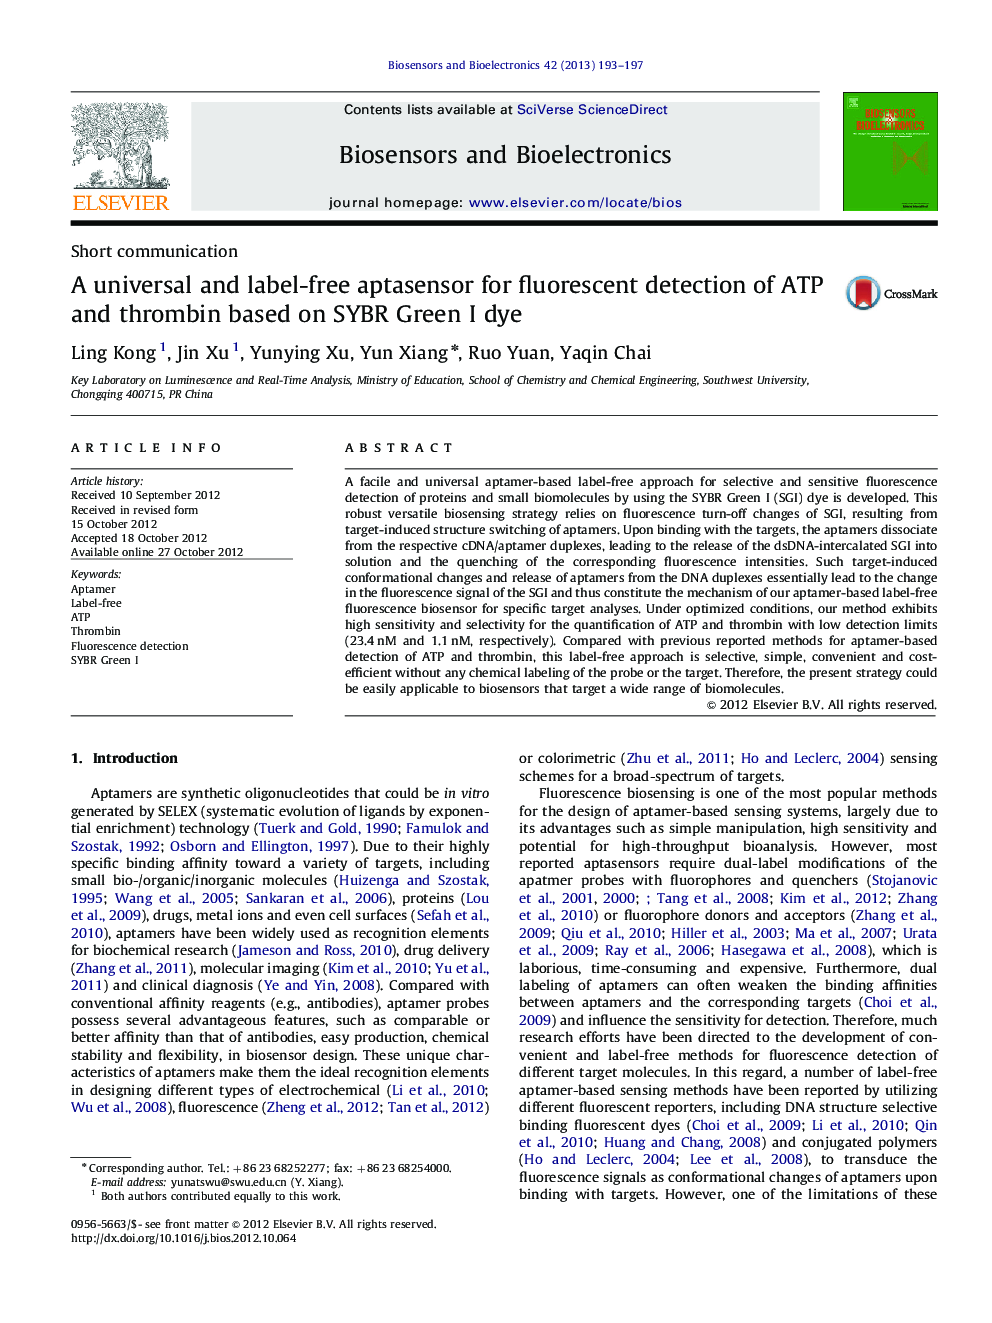 A universal and label-free aptasensor for fluorescent detection of ATP and thrombin based on SYBR Green Idye